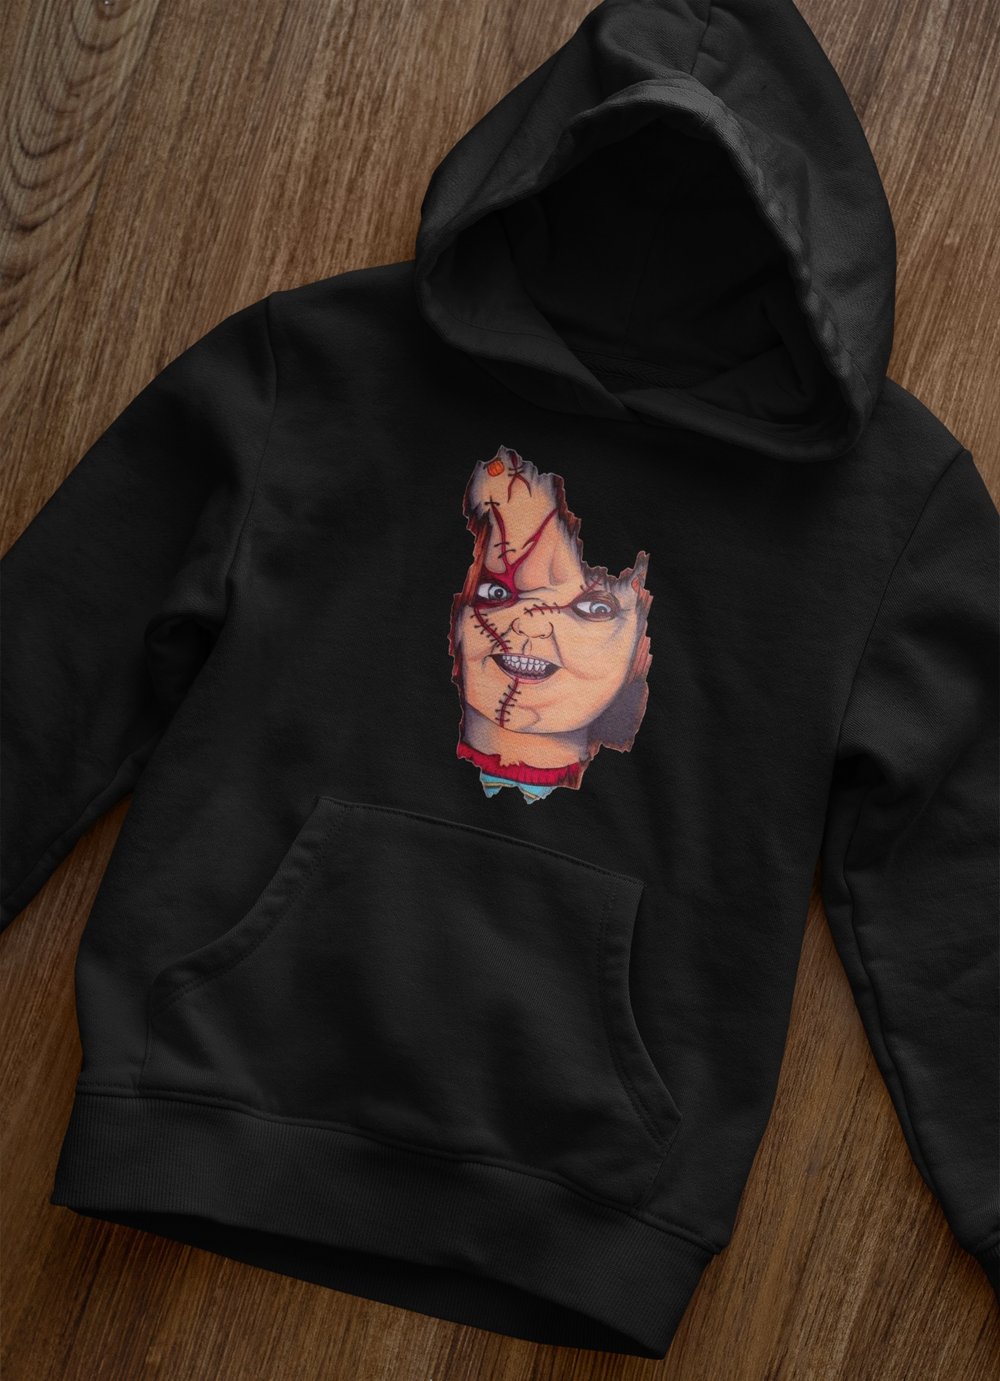 Nightmares CHCKY  (HOODY ONLY) 